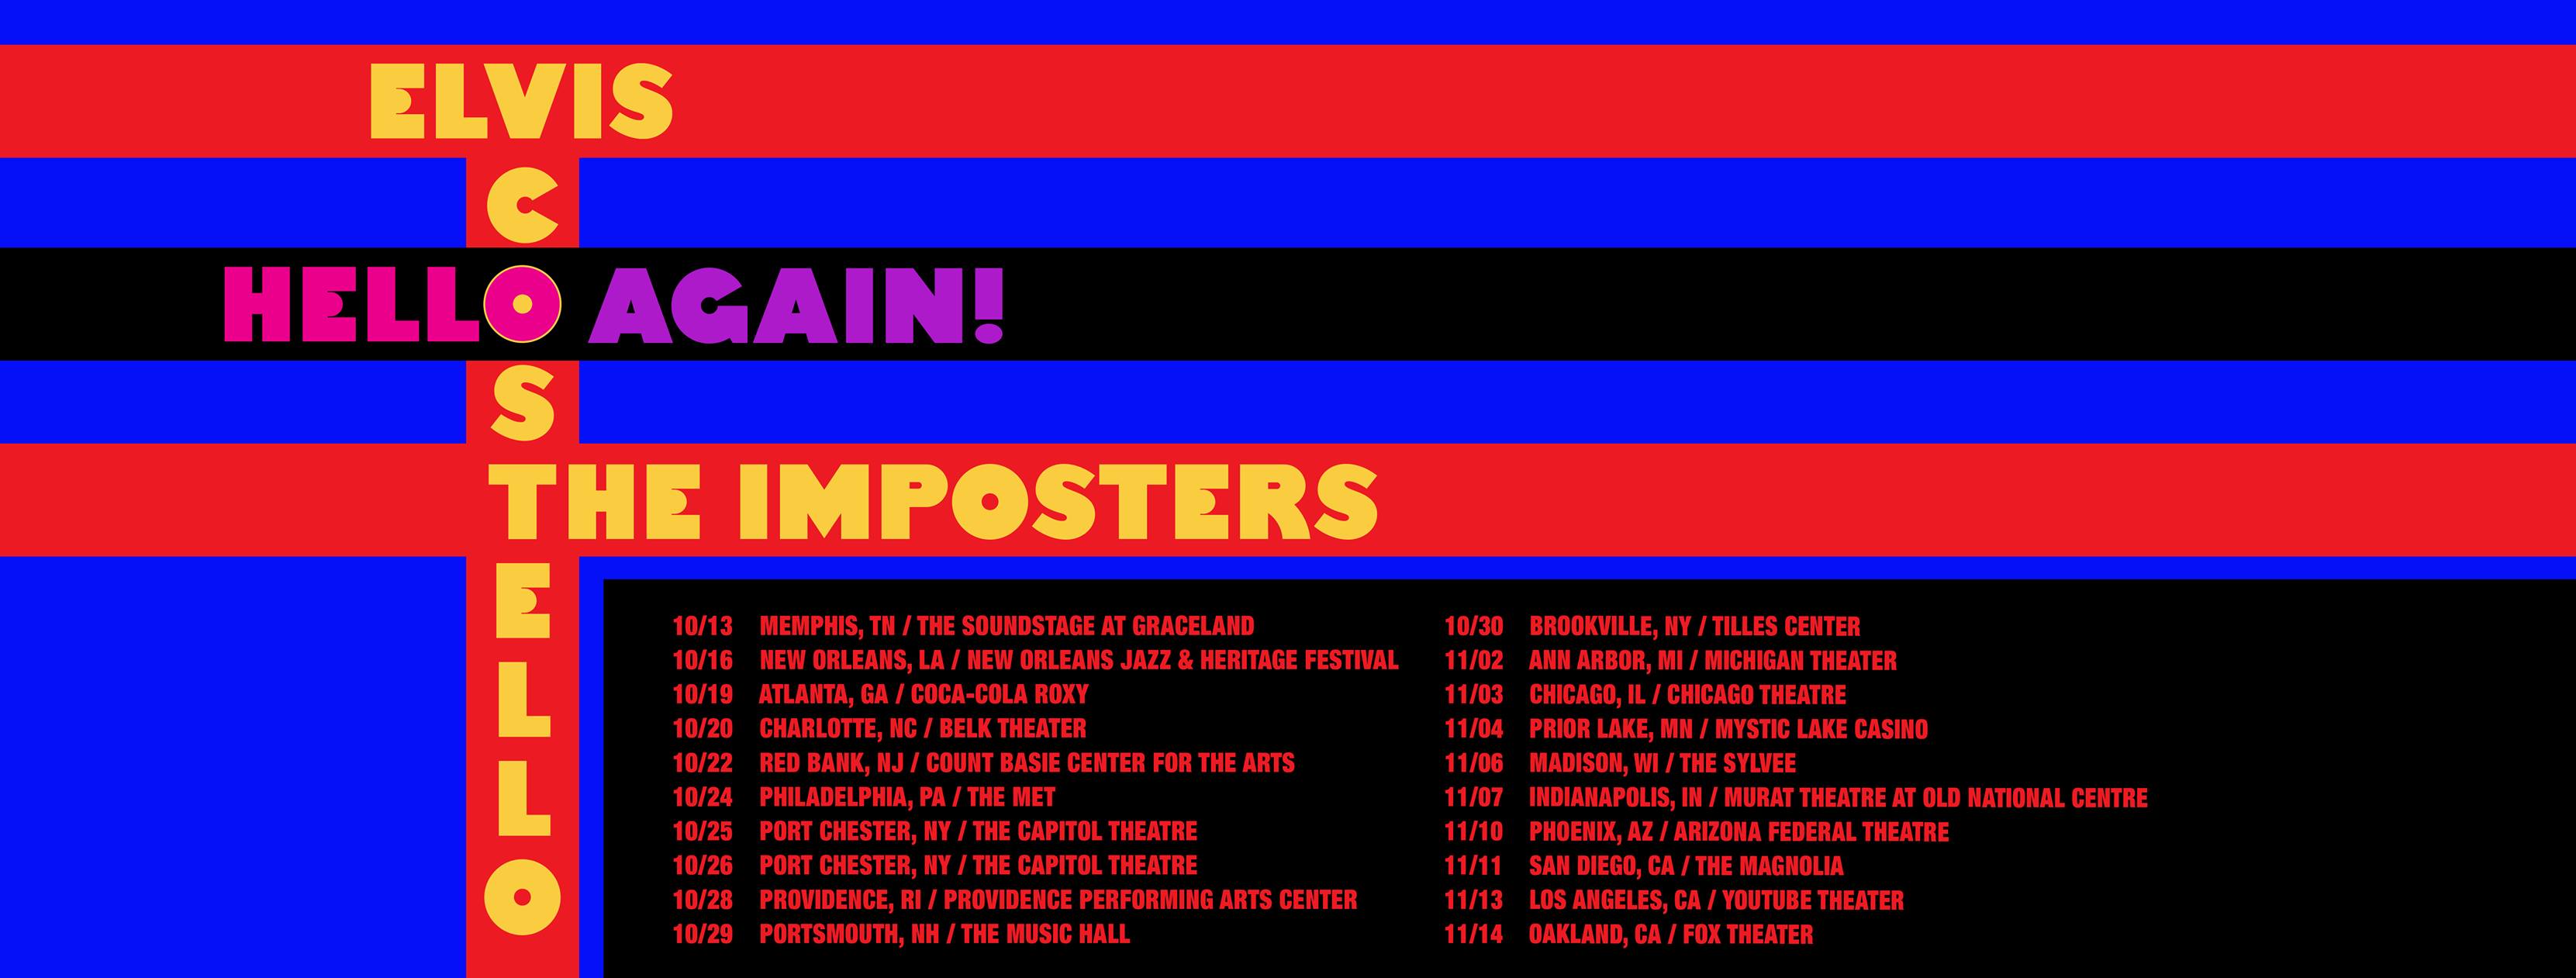 Elvis Costello & The Imposters Announces Fall 2021 Hello Again Tour